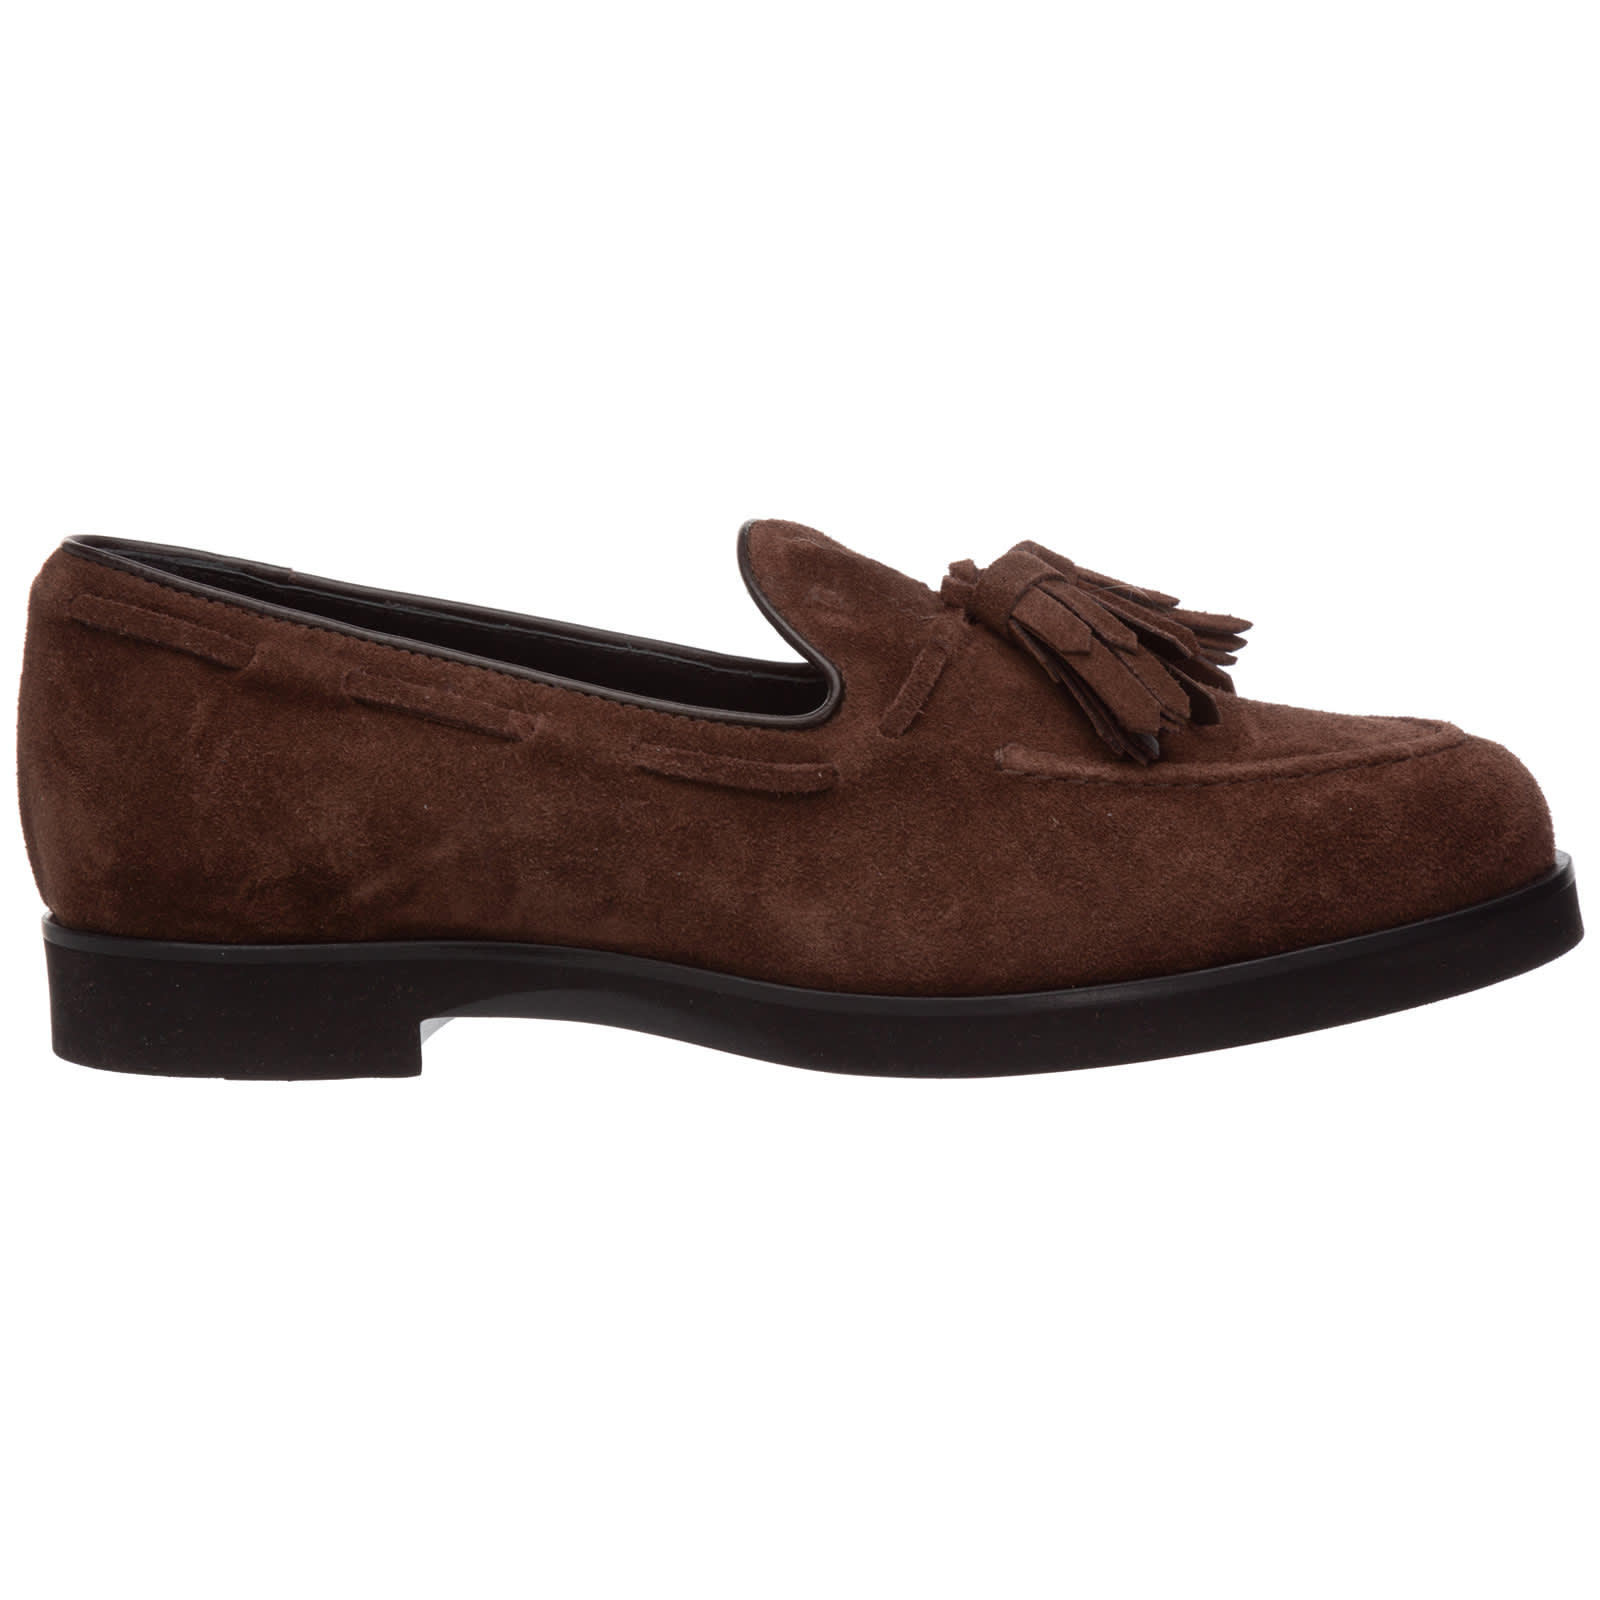 Tods Interactive Moccasins